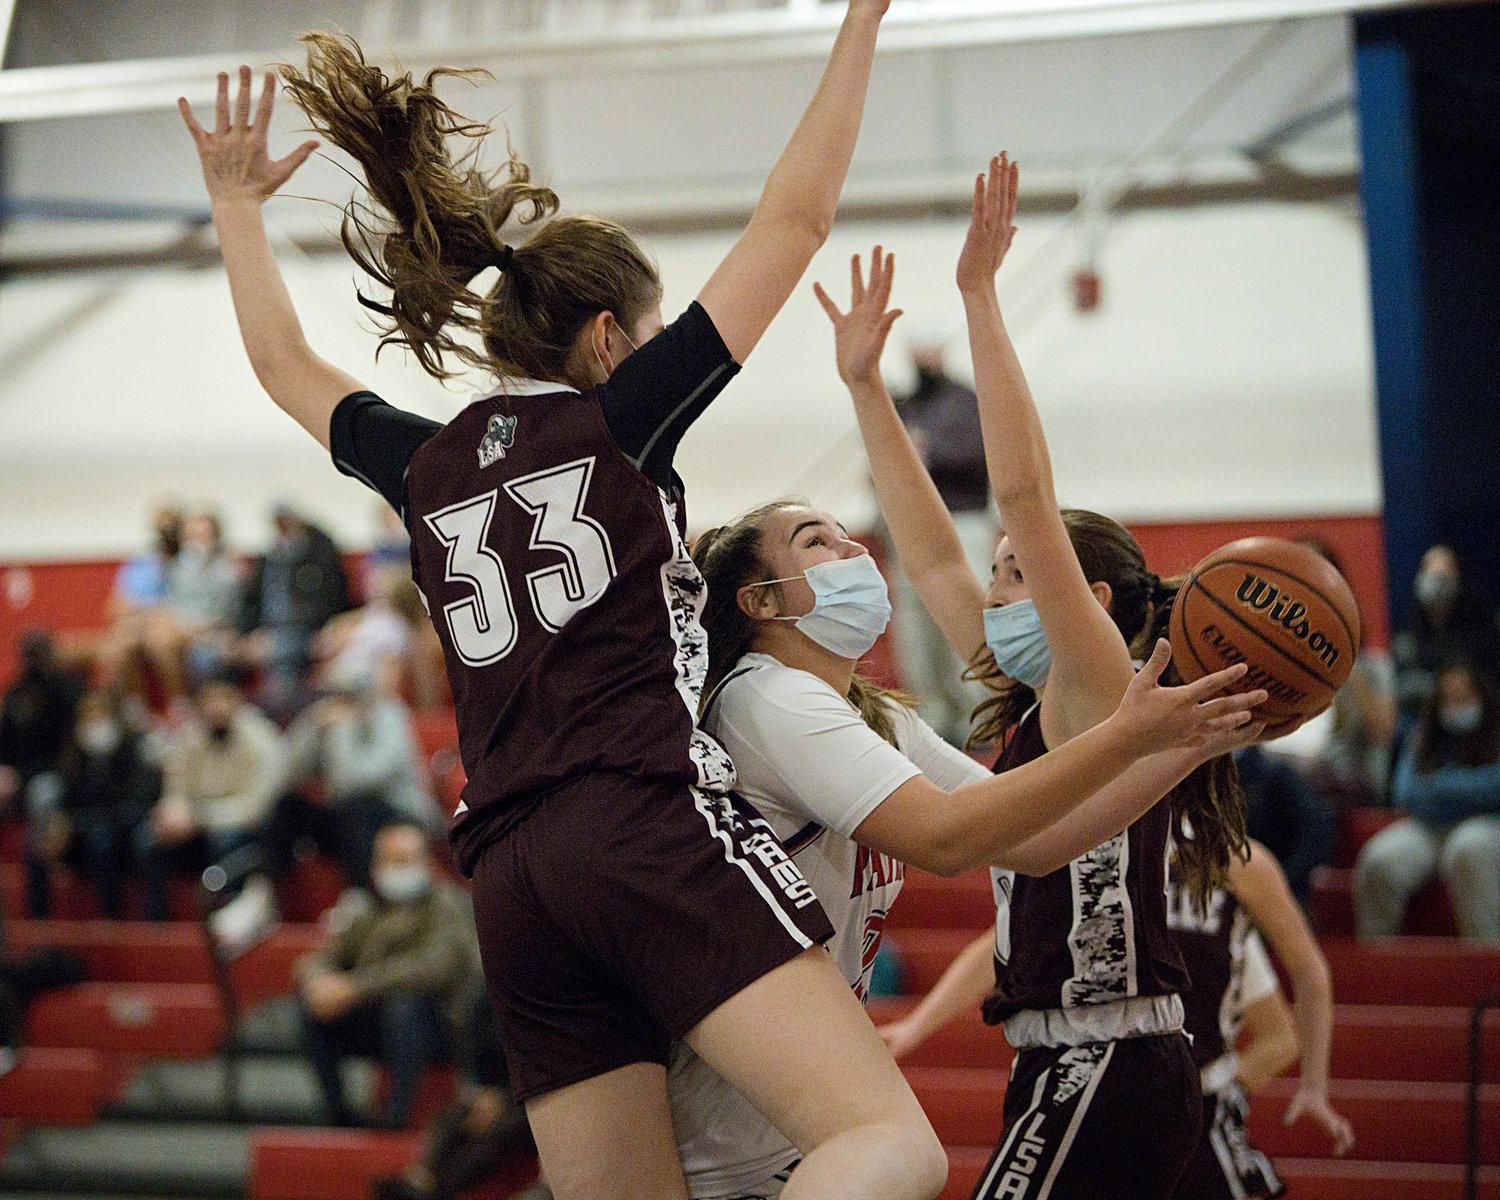 The Patriots’ Emily Maiato is sandwiched by a pair of La Salle defenders en route to the basket.